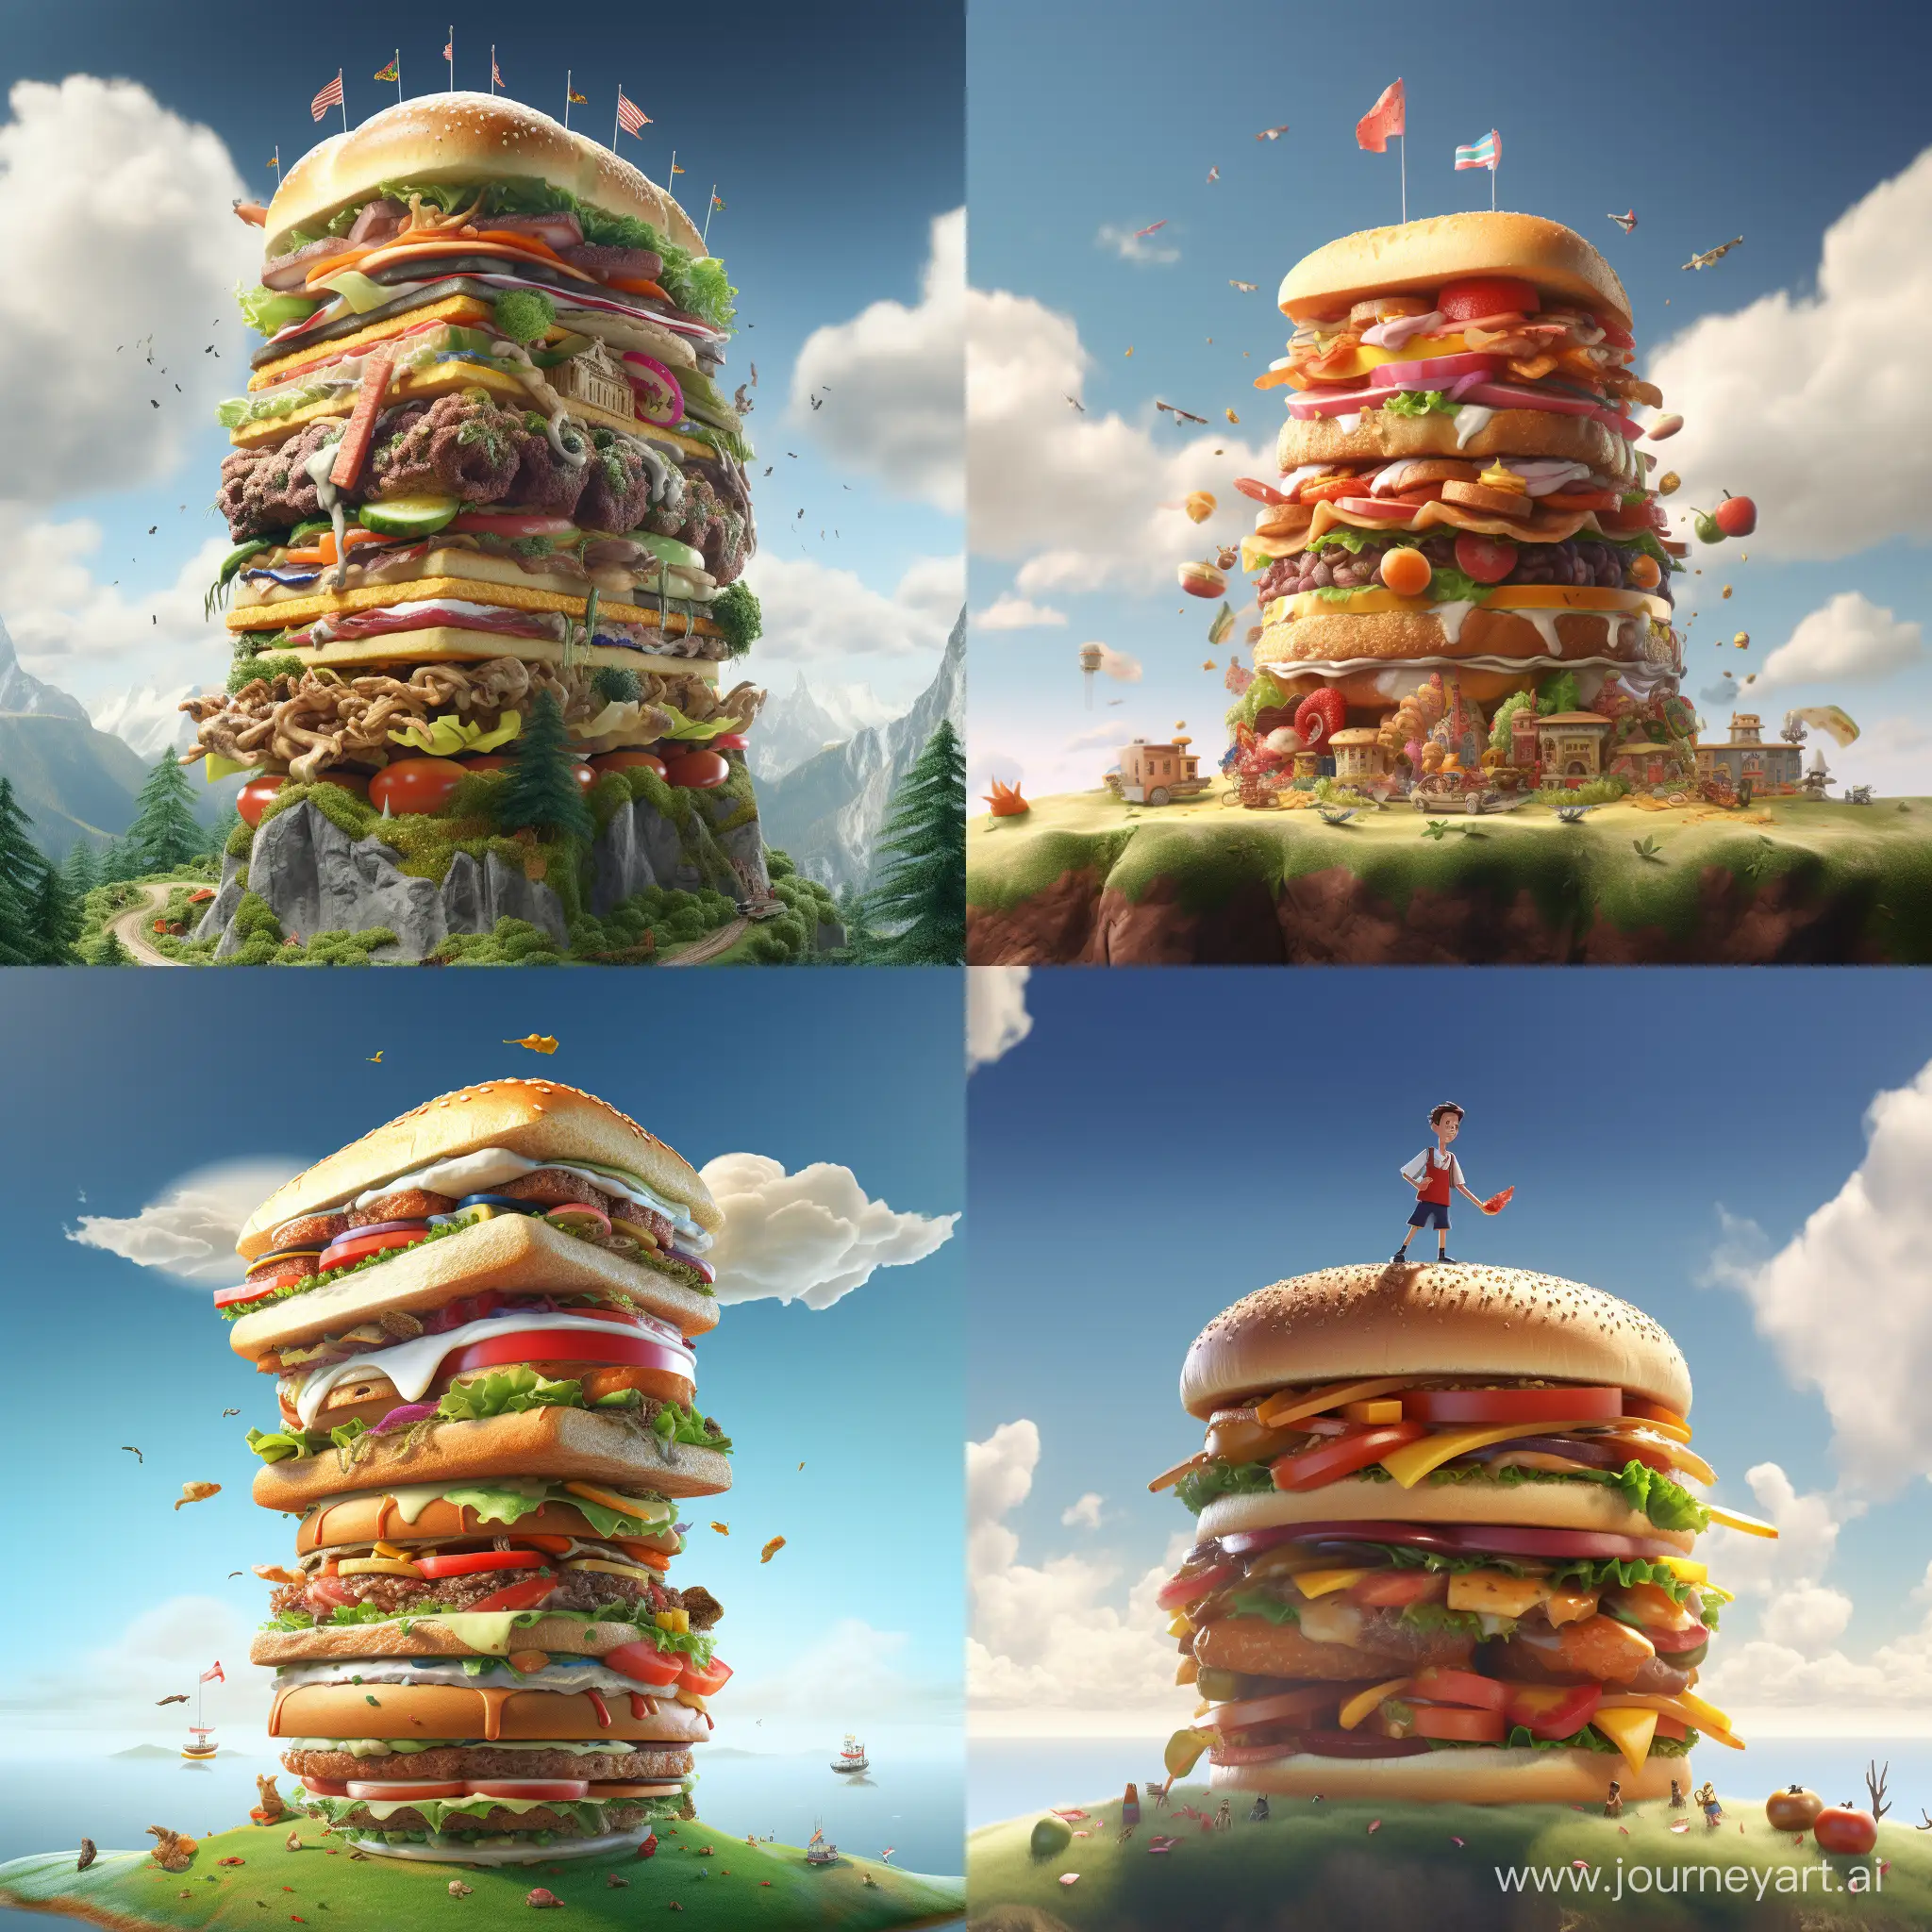 Tower-Sandwich-Whimsical-3D-Animation-of-a-Very-Tall-Sandwich